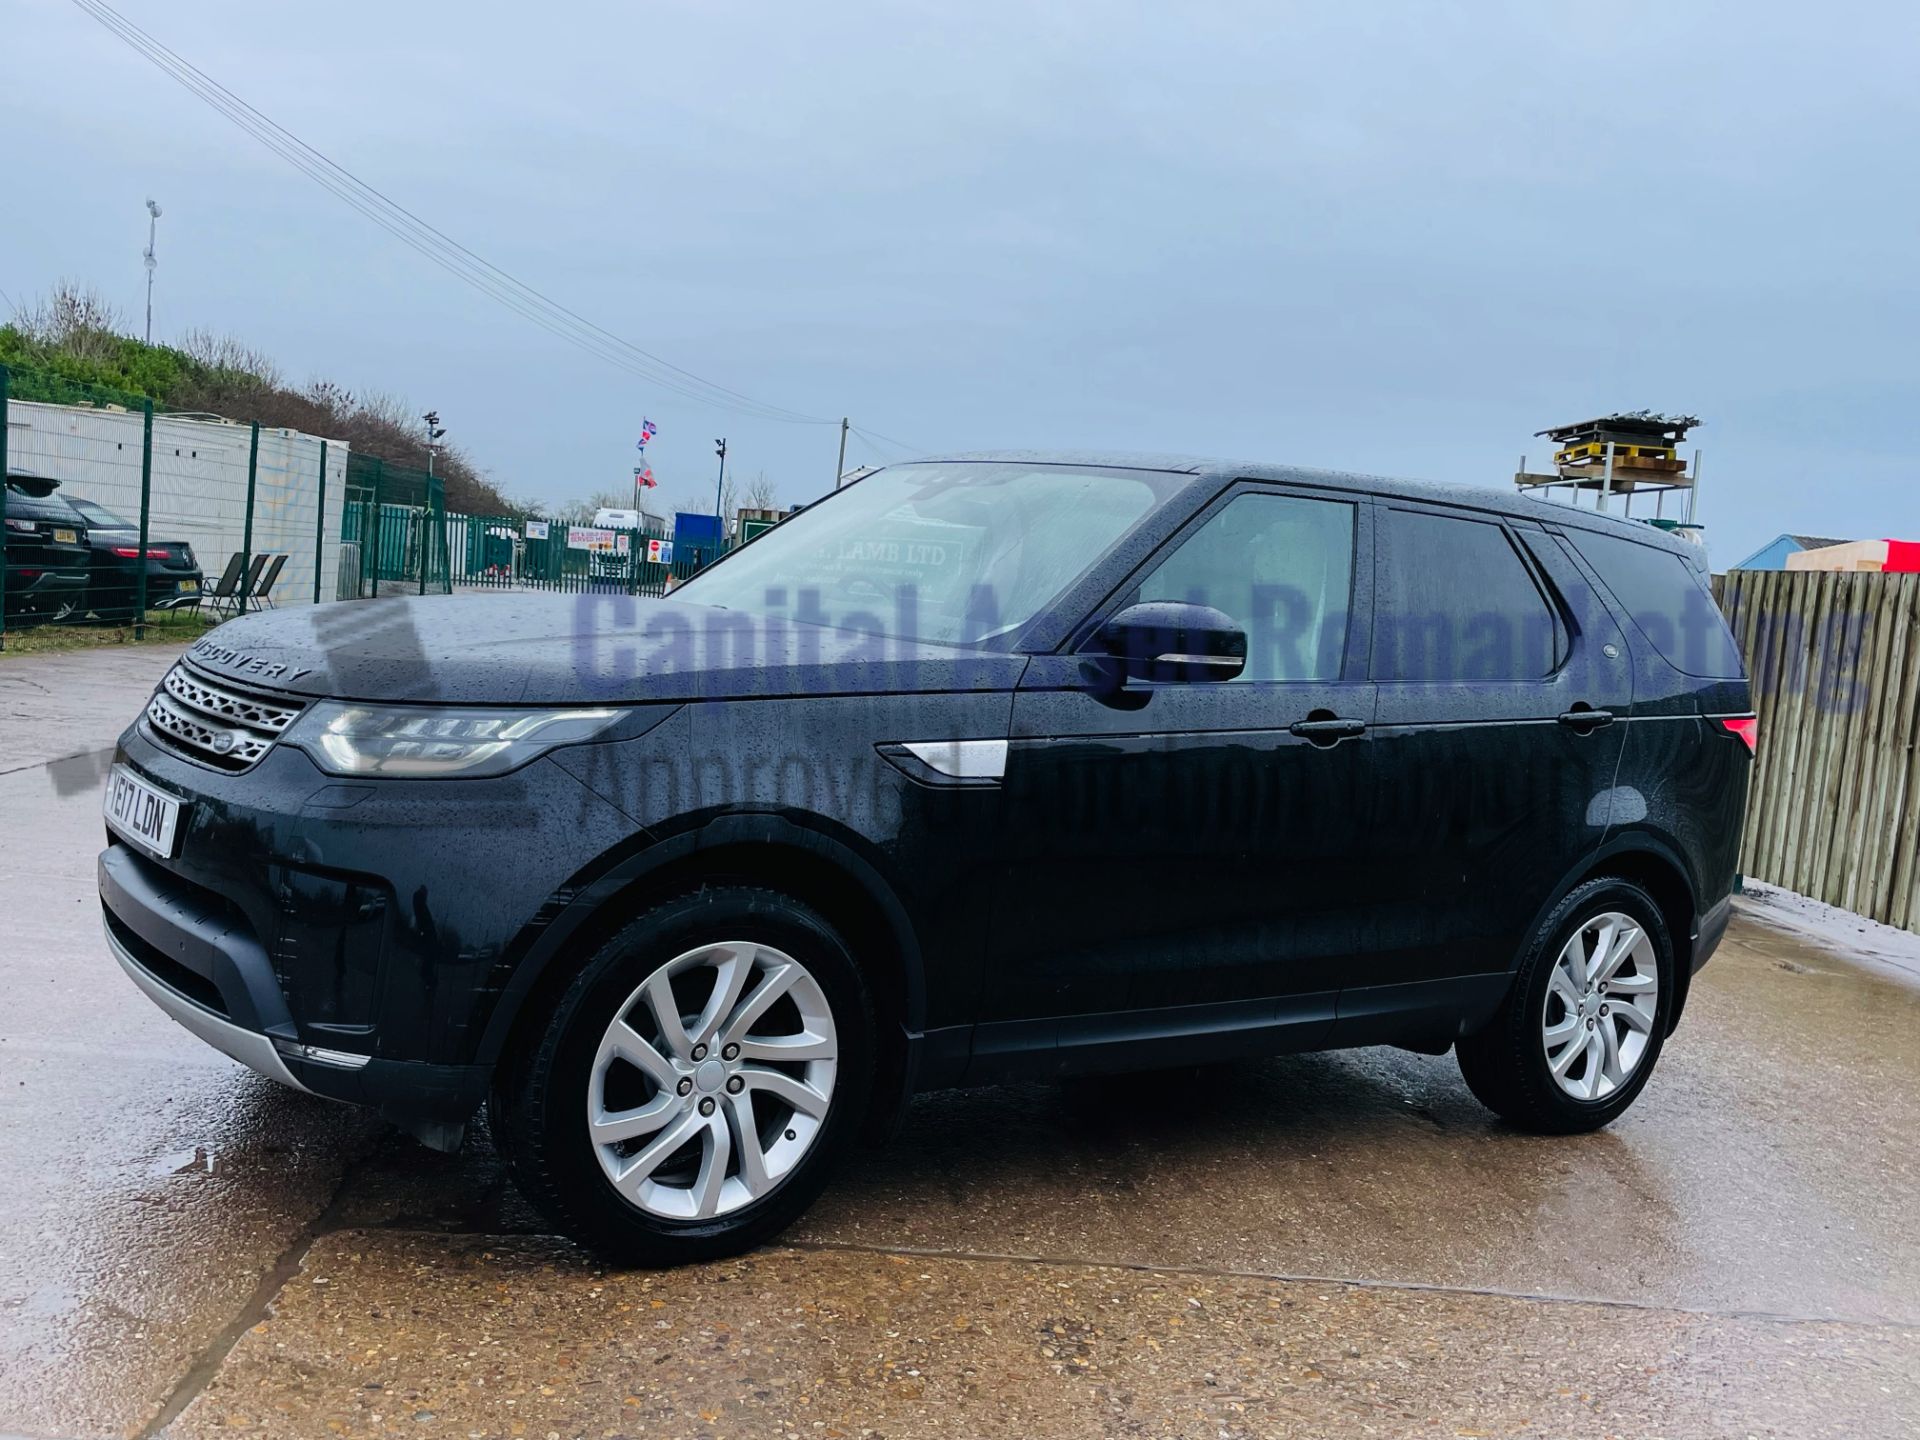 LAND ROVER DISCOVERY 5 *HSE EDITION* 7 SEATER SUV (2017 EURO 6) 8 SPEED AUTO - PAN ROOF *HUGE SPEC* - Image 8 of 64